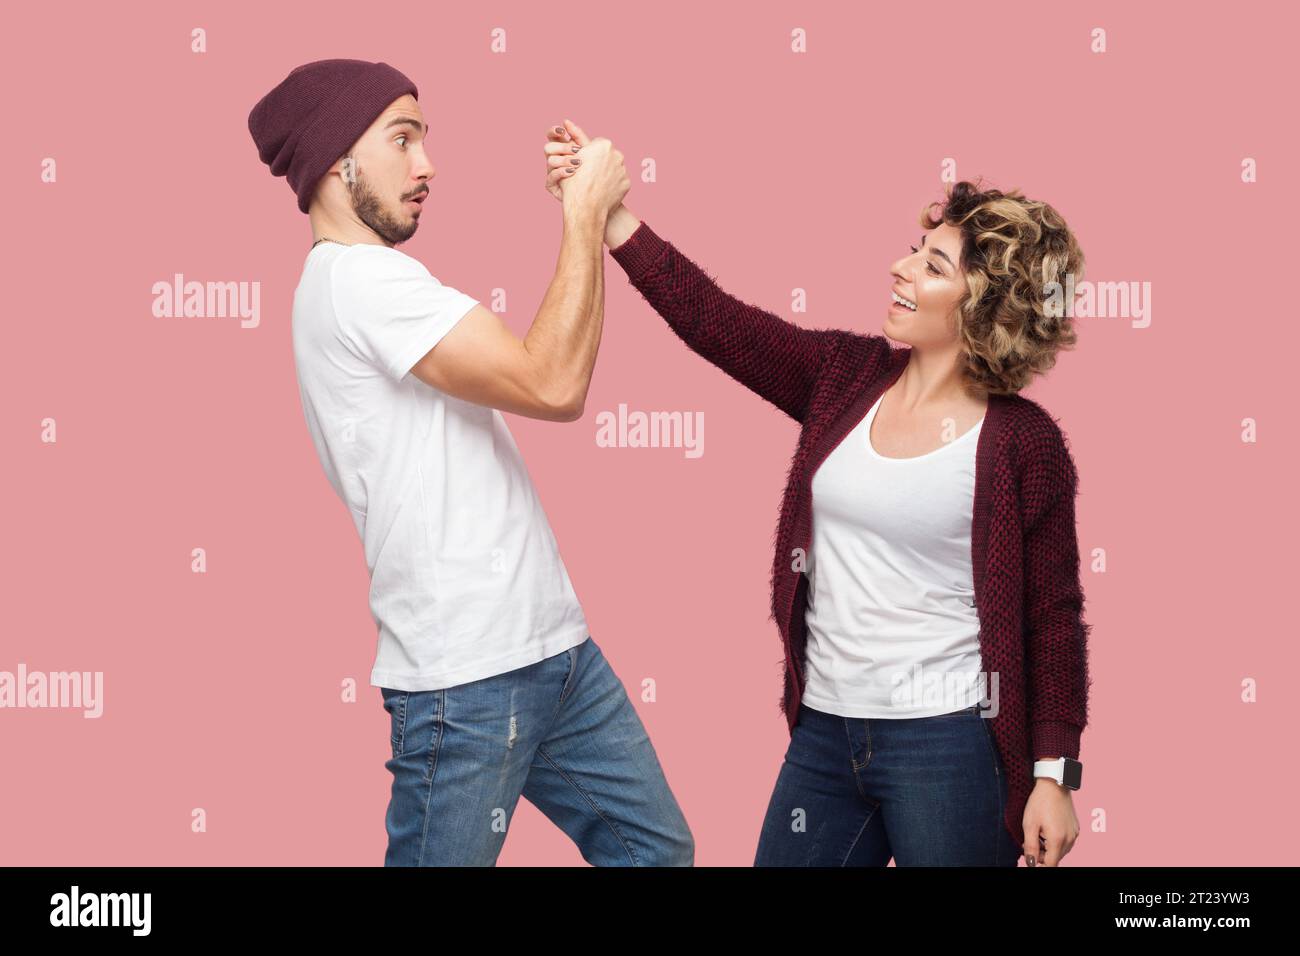 Portrait of smiling positive woman and surprised shocked man standing together and holding hands, looking at each other with different emotions. Indoor studio shot isolated on pink background. Stock Photo